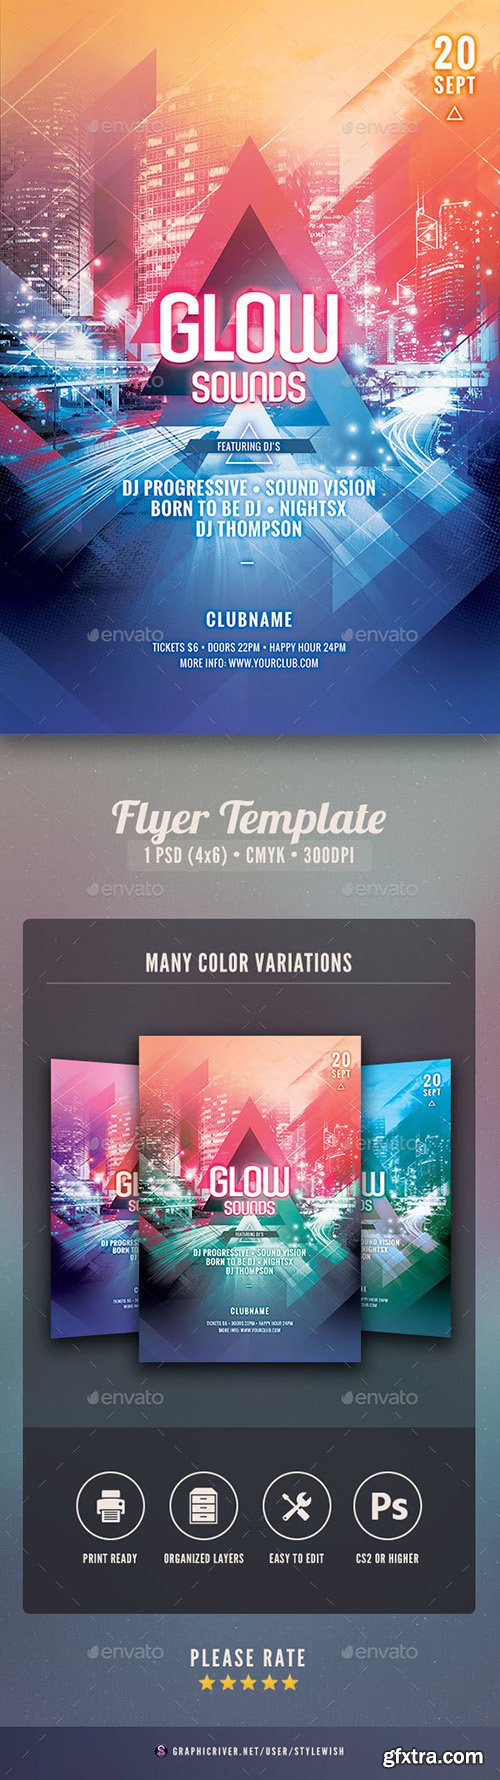 Graphicriver Glow Sounds Flyer 20424198